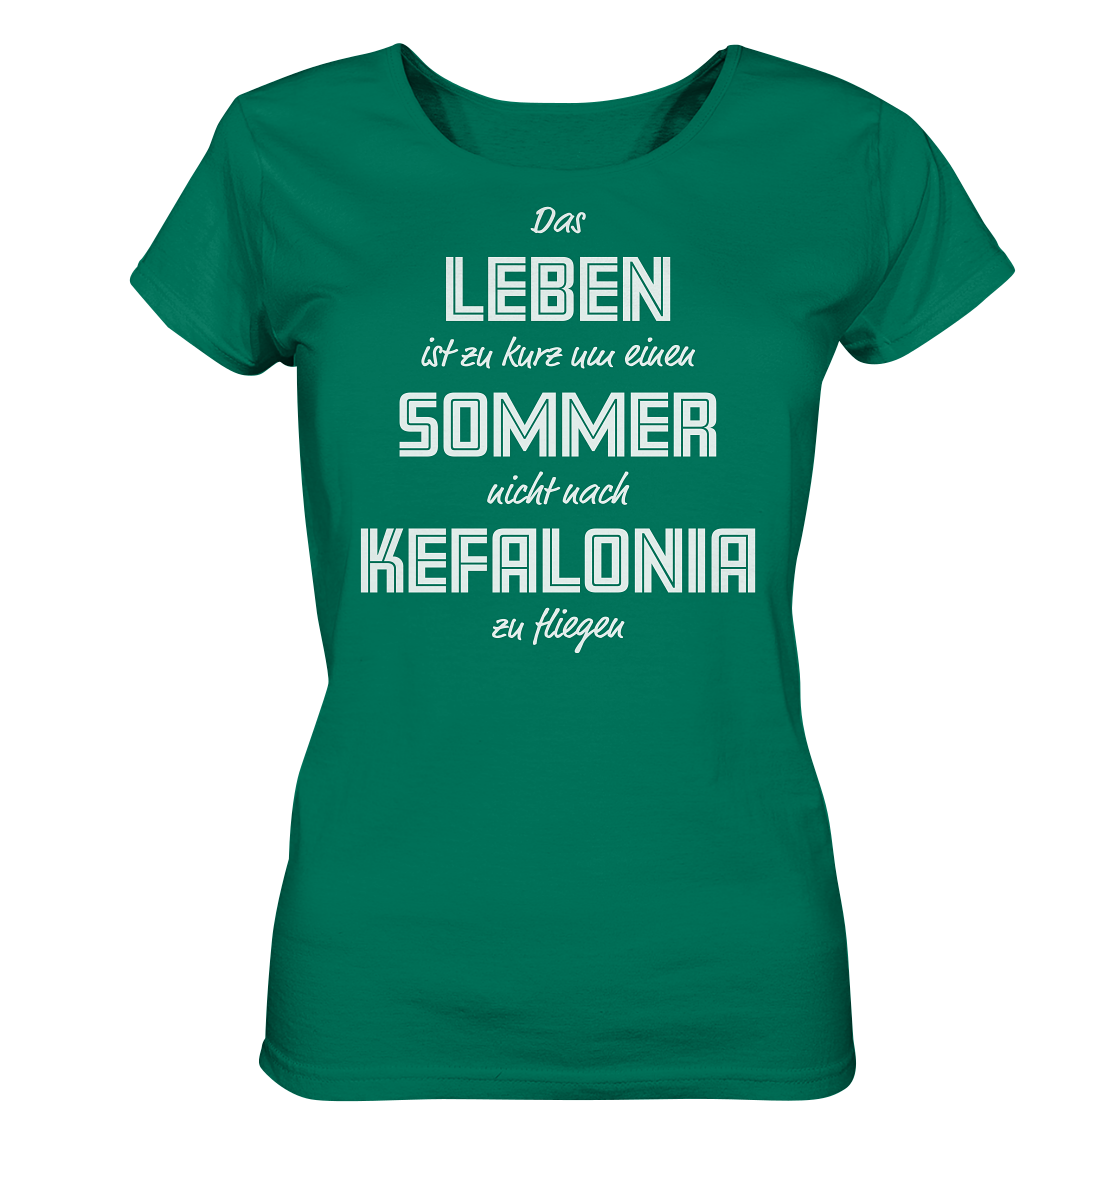 Life is too short not to fly to Kefalonia for a summer - Ladies Organic Shirt